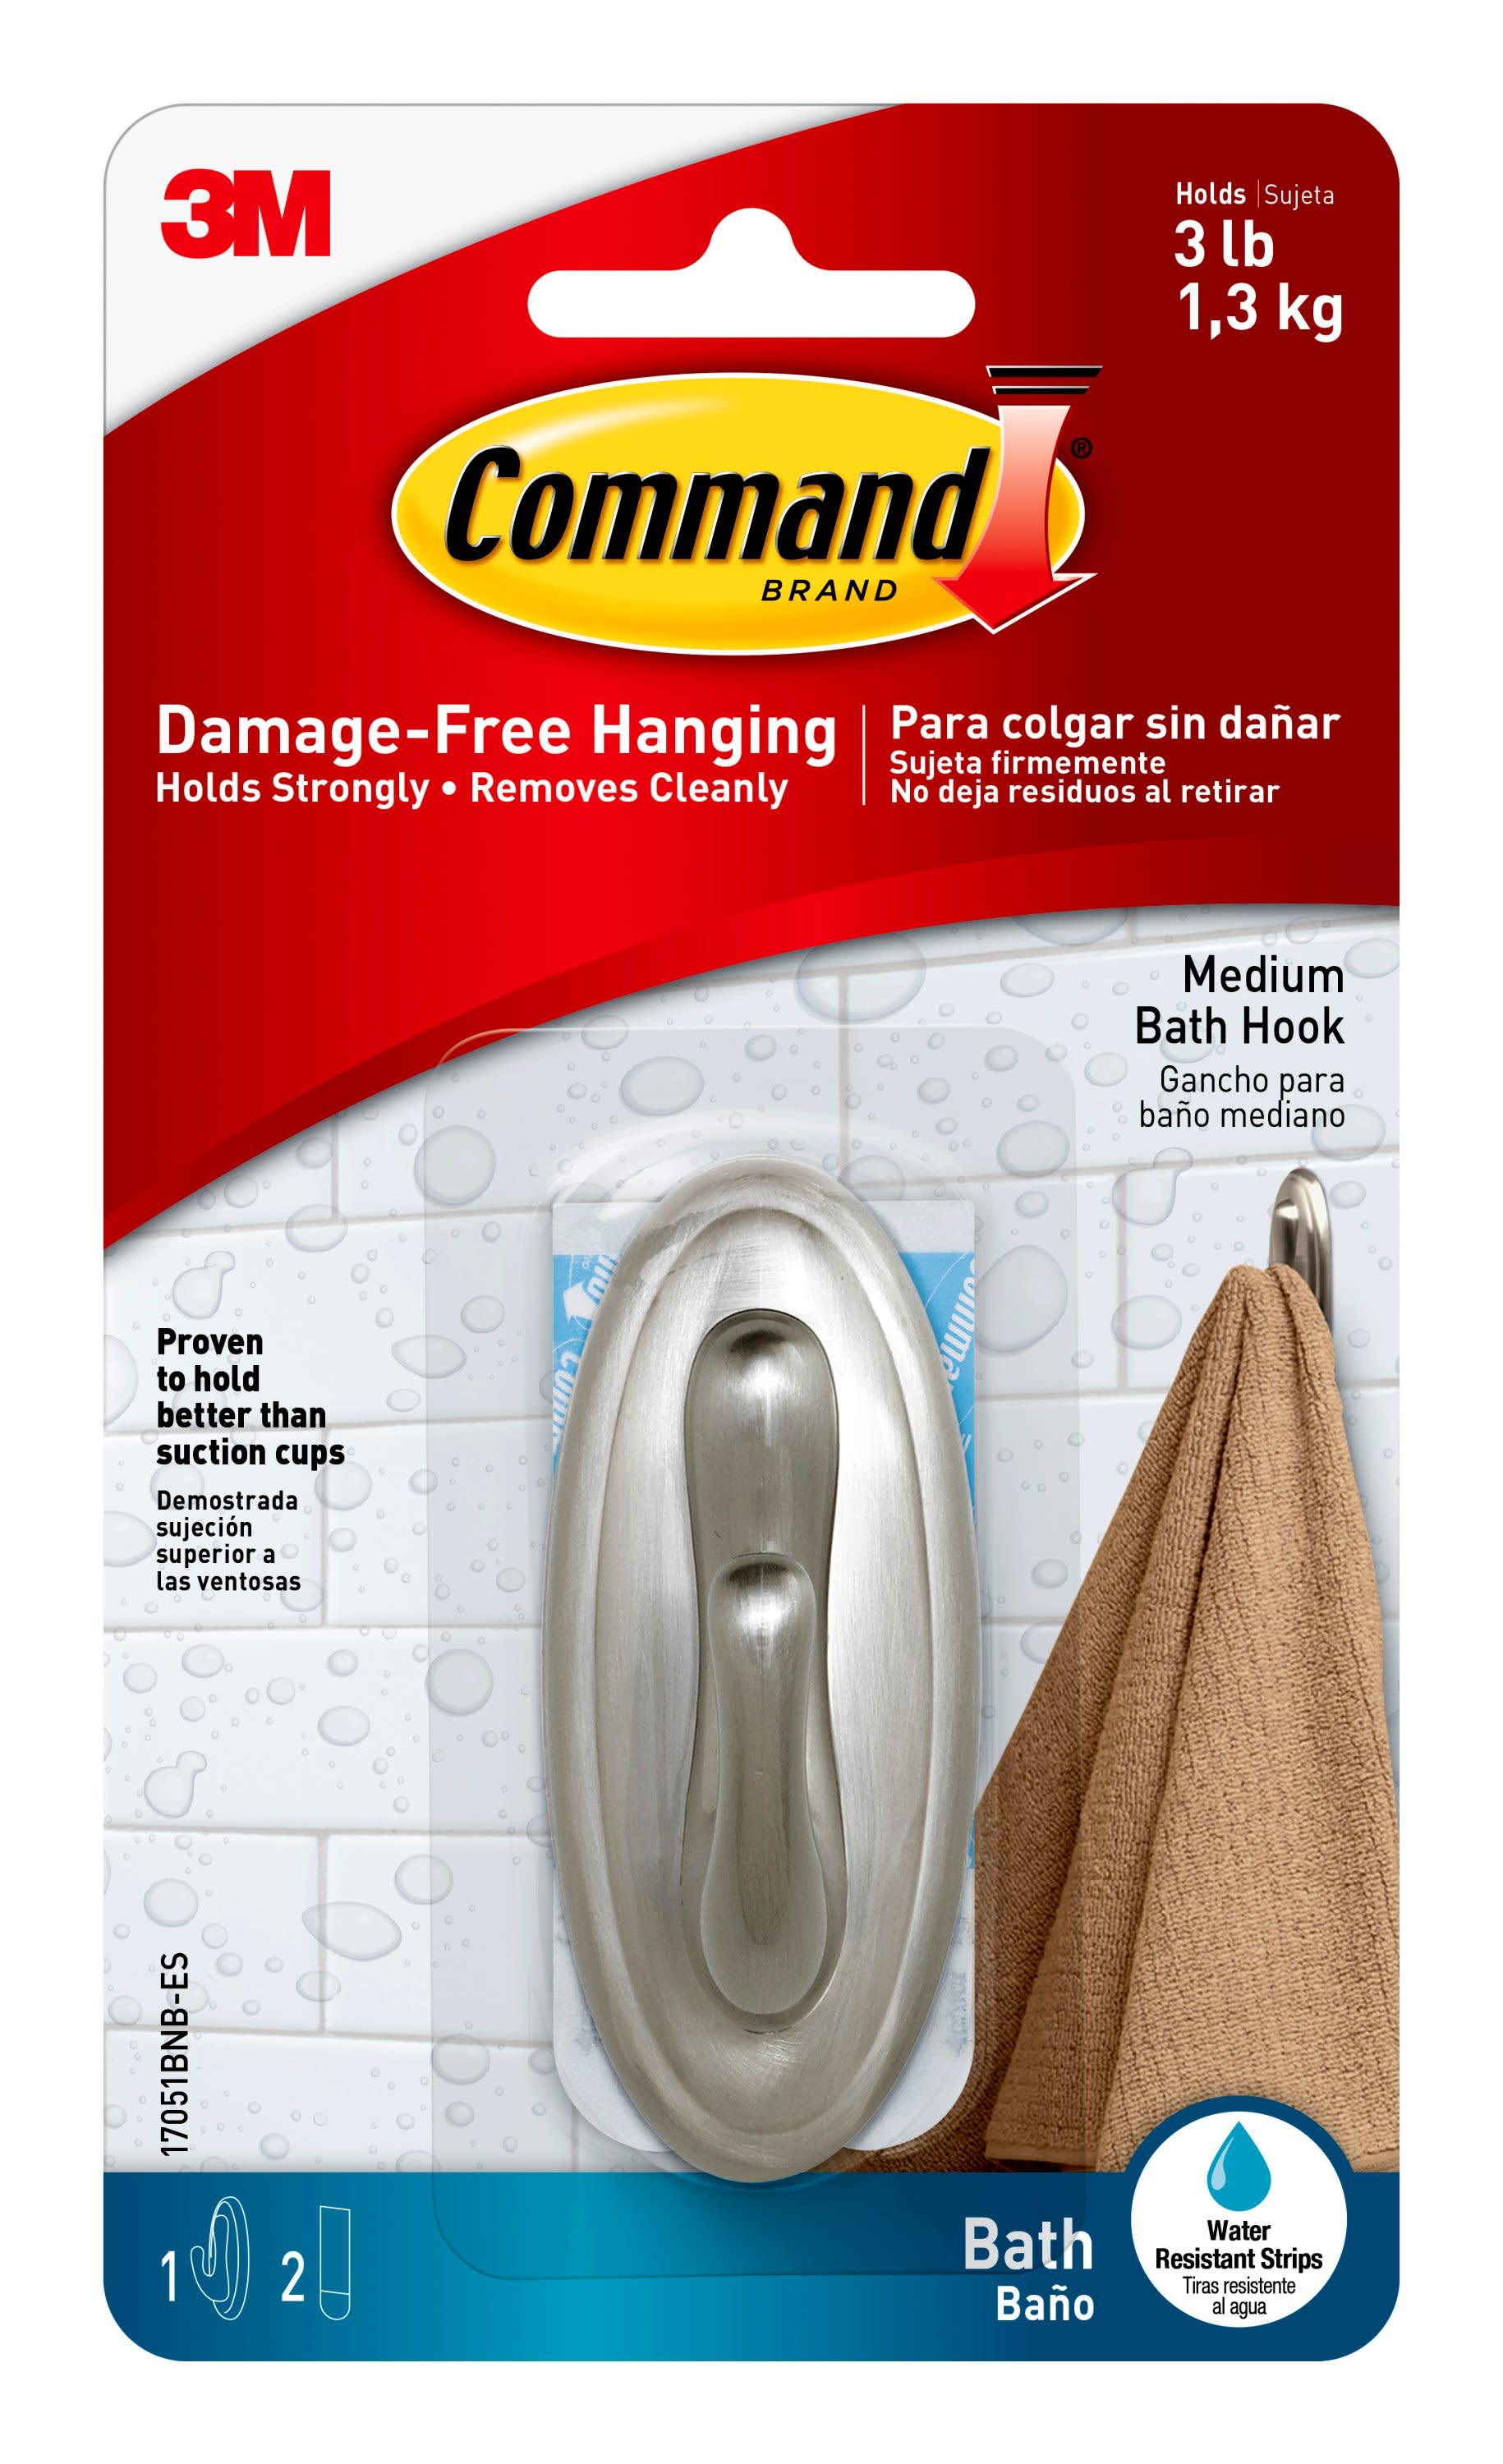 3M Command Bath Corner Caddy Organizer Holds Wet Humid Plastic Frosted,  6-Pack